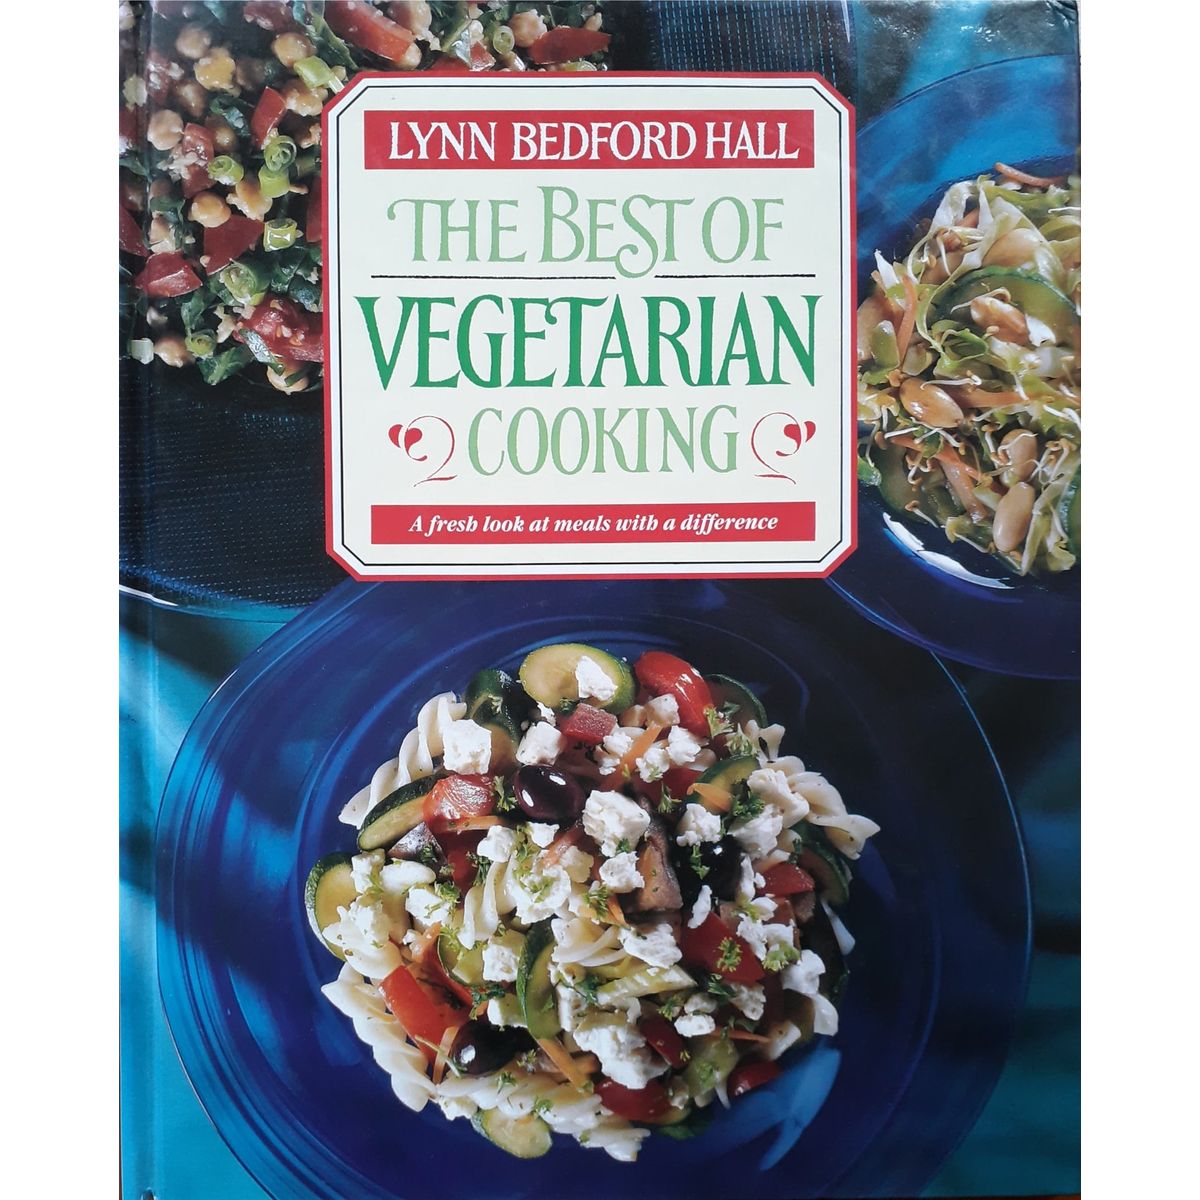 ISBN: 9780869785515 / 0869785516 - The Best of Vegetarian Cooking: A Fresh Look at Meals with a Difference by Lynn Bedford Hall [1991]